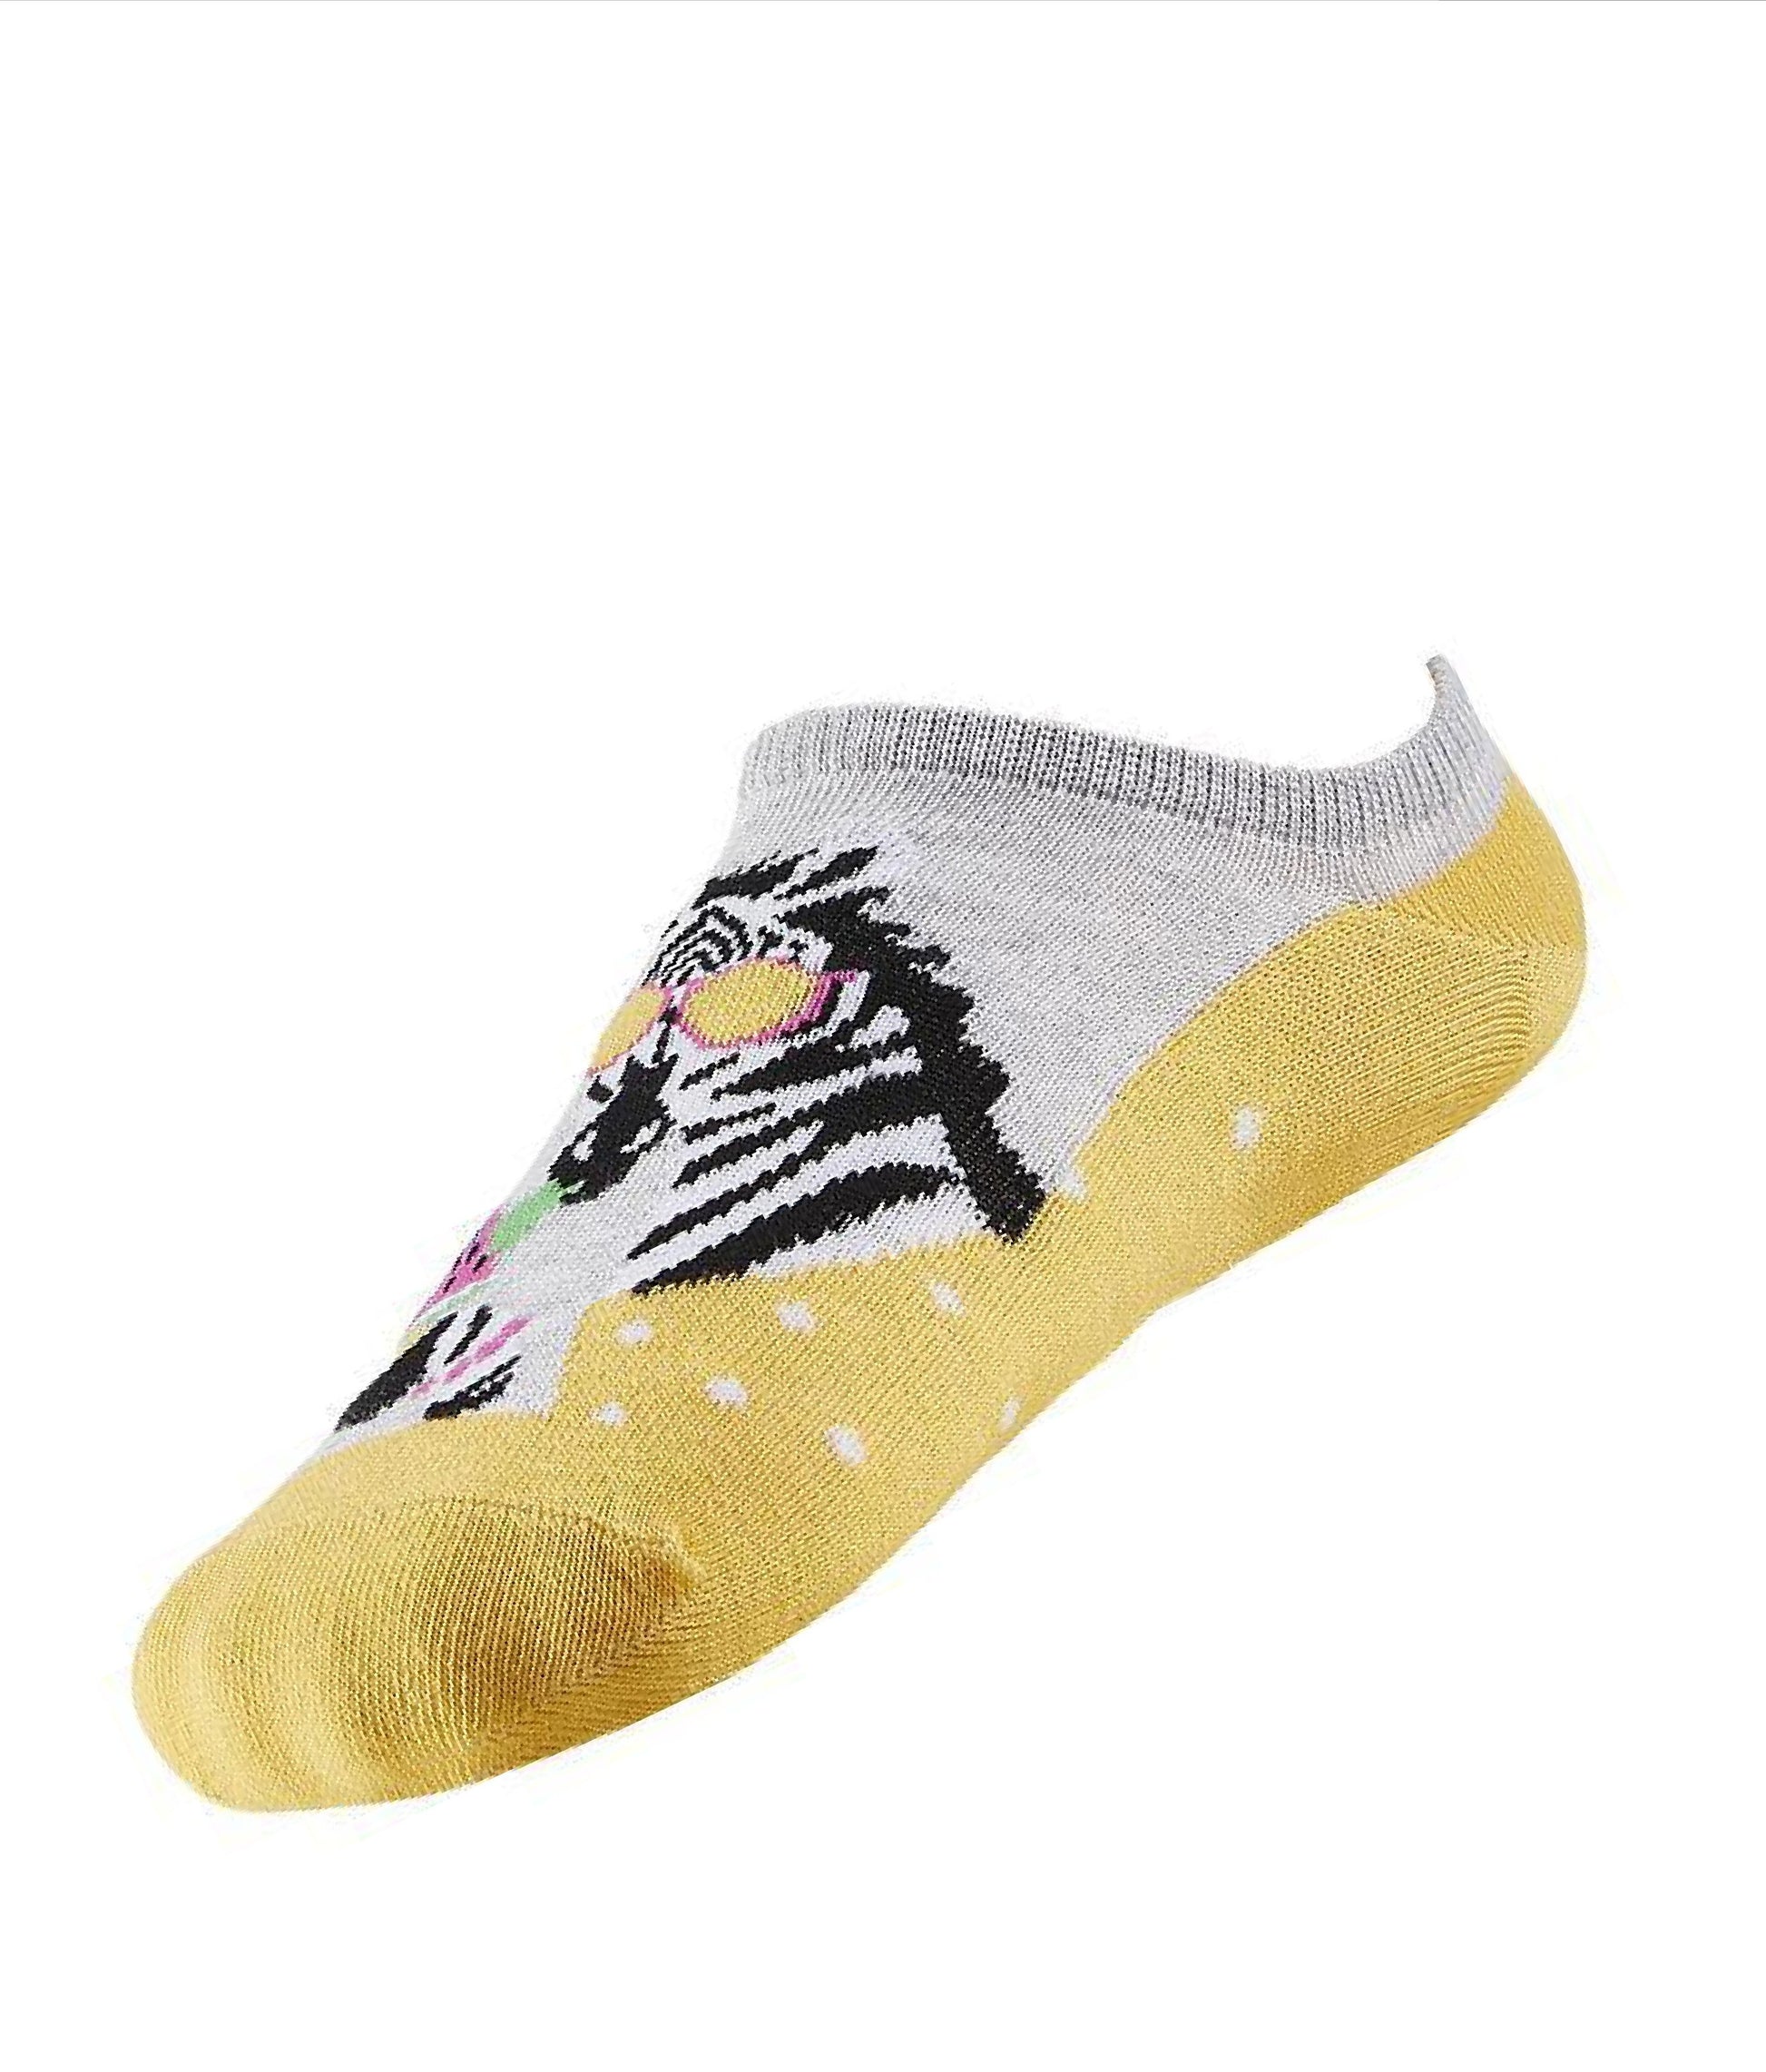 Ysabel Mora Zebra Low Sock - Light grey low ankle cotton sneaker no show socks with a yellow sole and zebra motif wearing shades and sipping a cocktail.